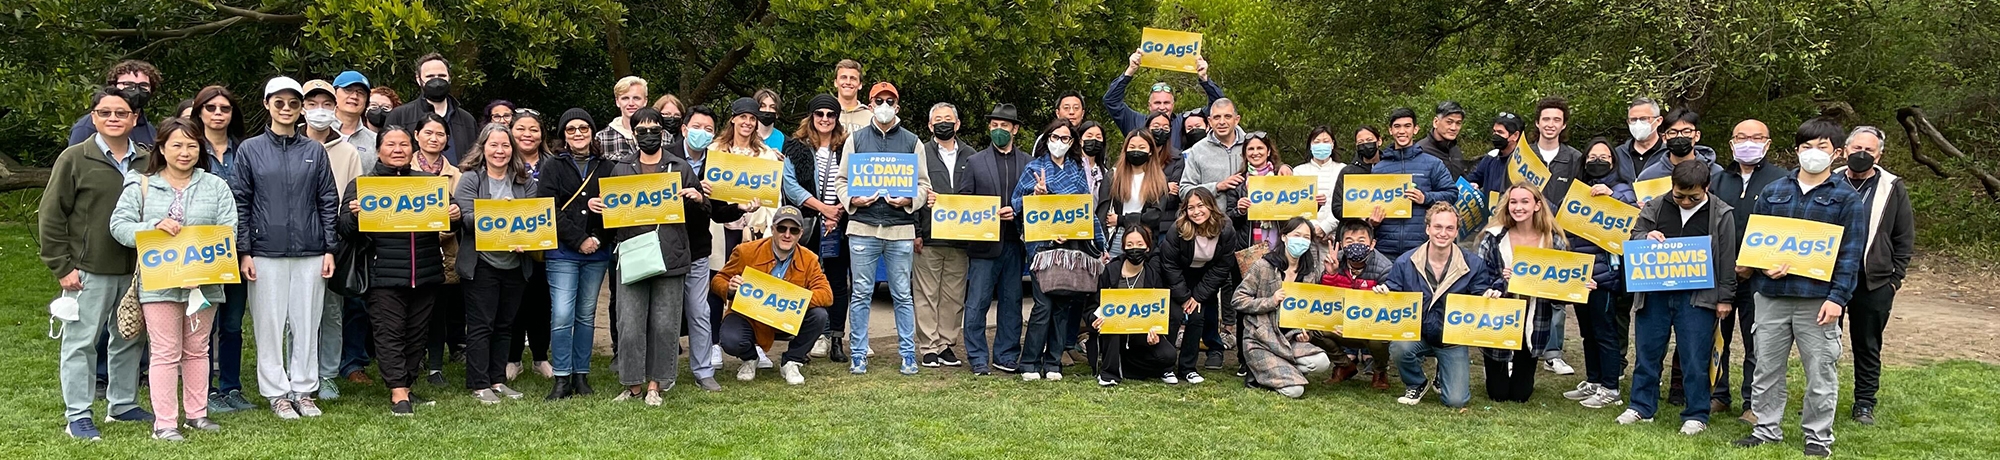 Variety of individuals wearing masks, standing in a group, and holding up multiple signs that say "Go Ags!" and one that says "UC Davis Alumni" 